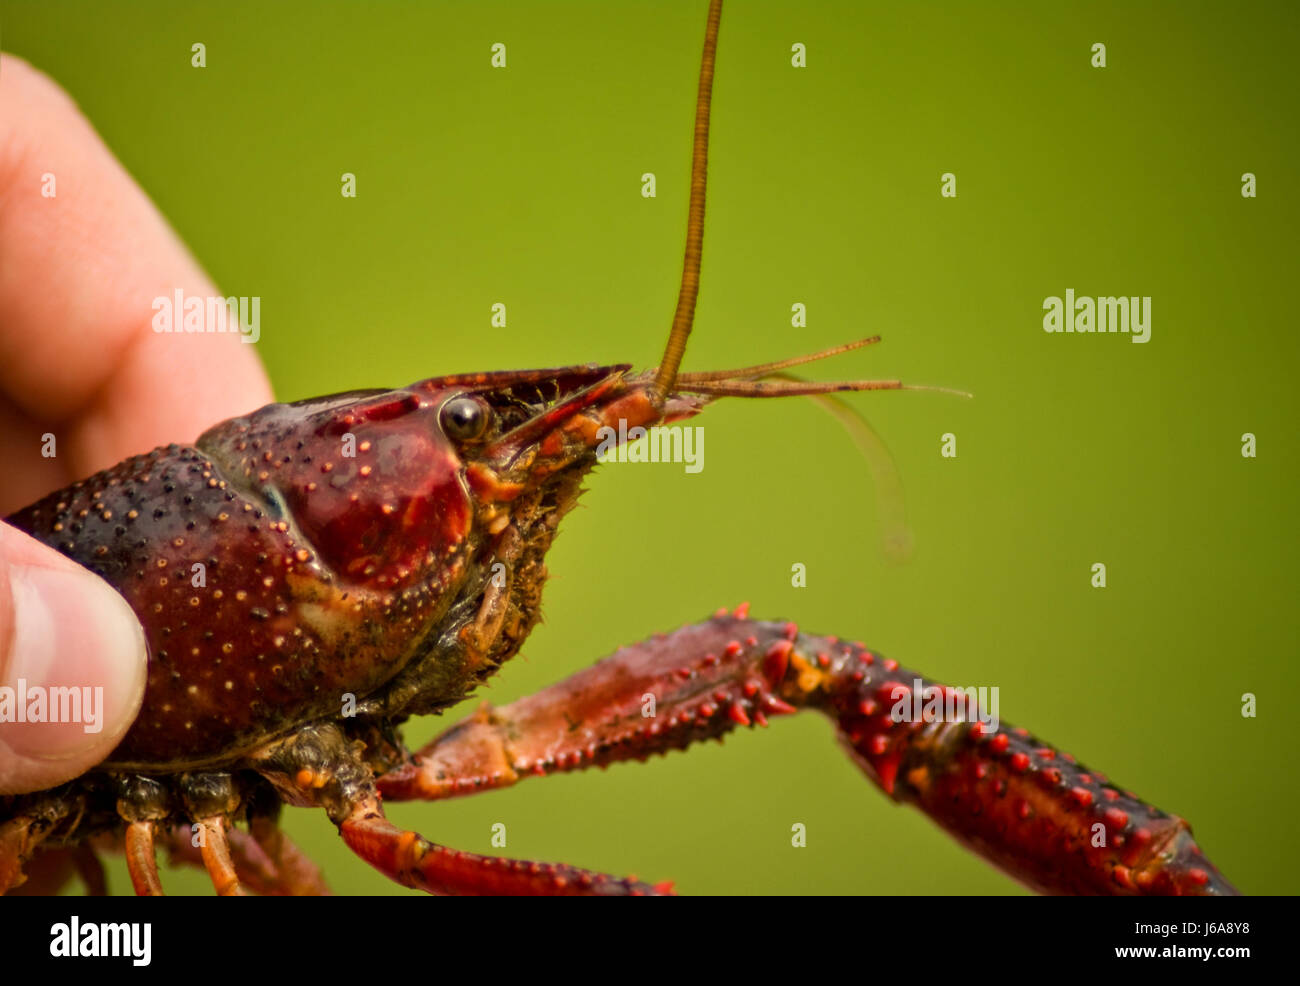 crayfish is held in the hand Stock Photo